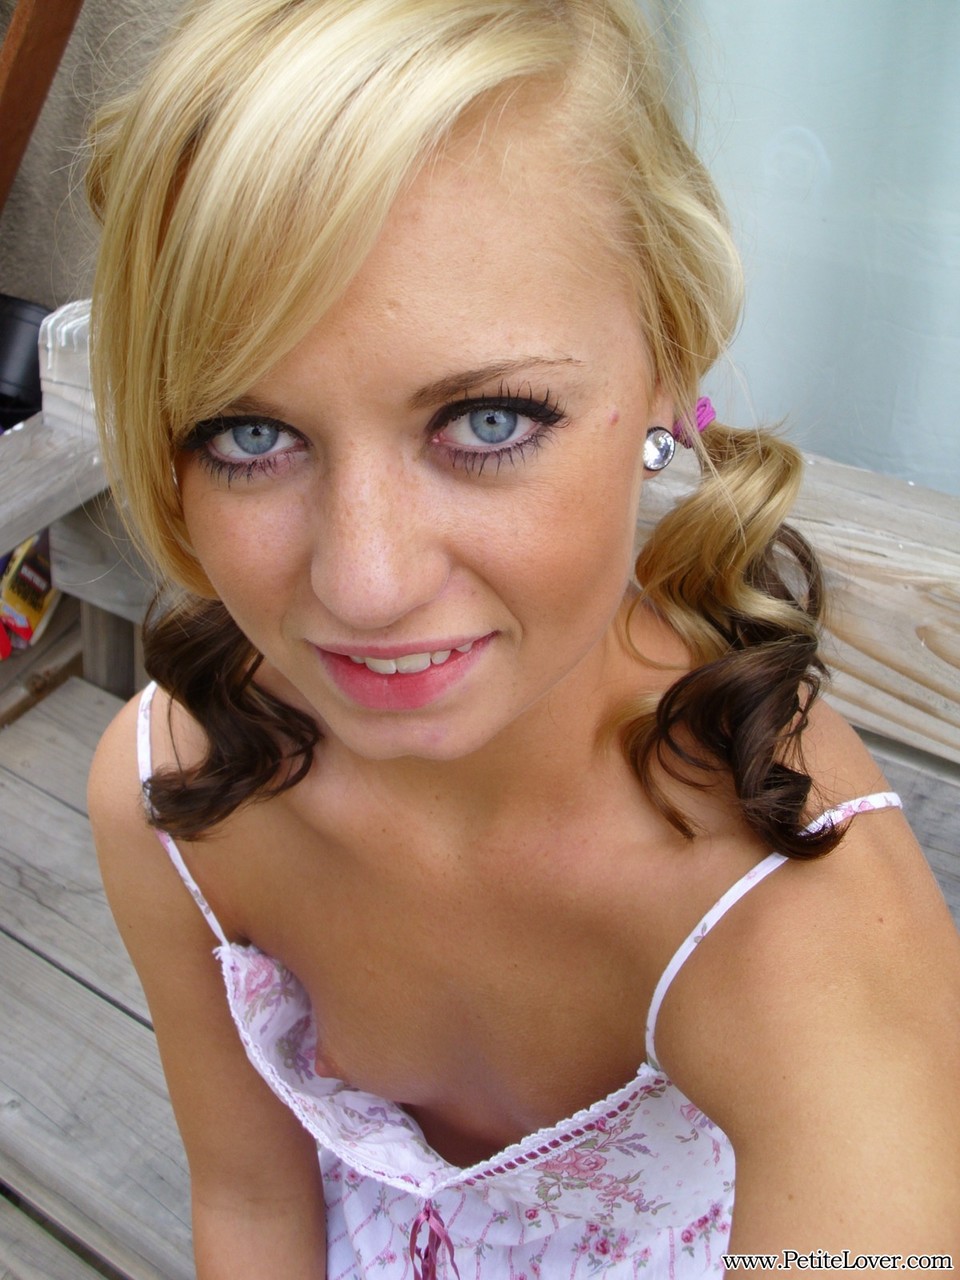 Cute blonde Tiff in pigtails showing off her wee small tits & tiny bald pussy zdjęcie porno #428478636 | Petite Lover Pics, Tiff, Amateur, mobilne porno